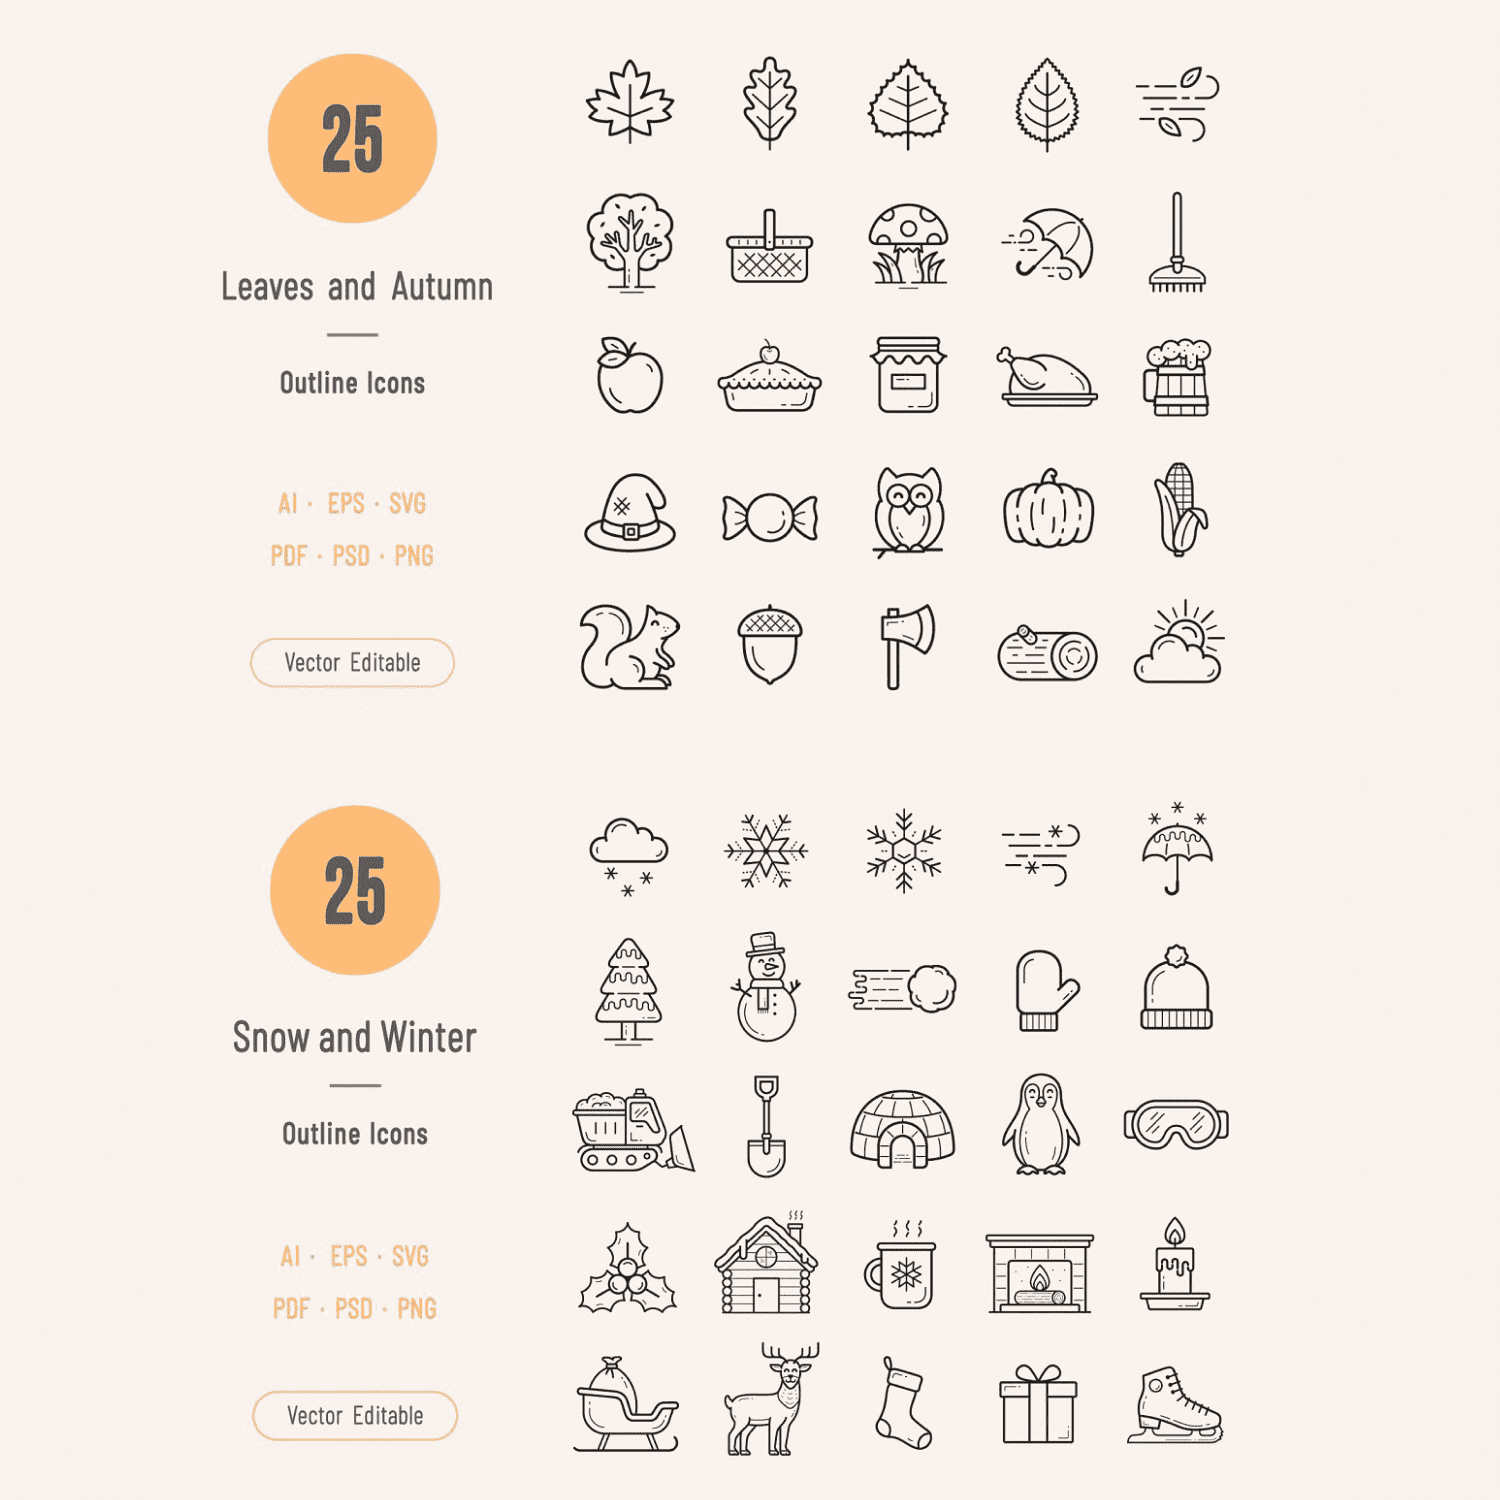 Four Seasons Outline Icons BUNDLE created by Sargatal.